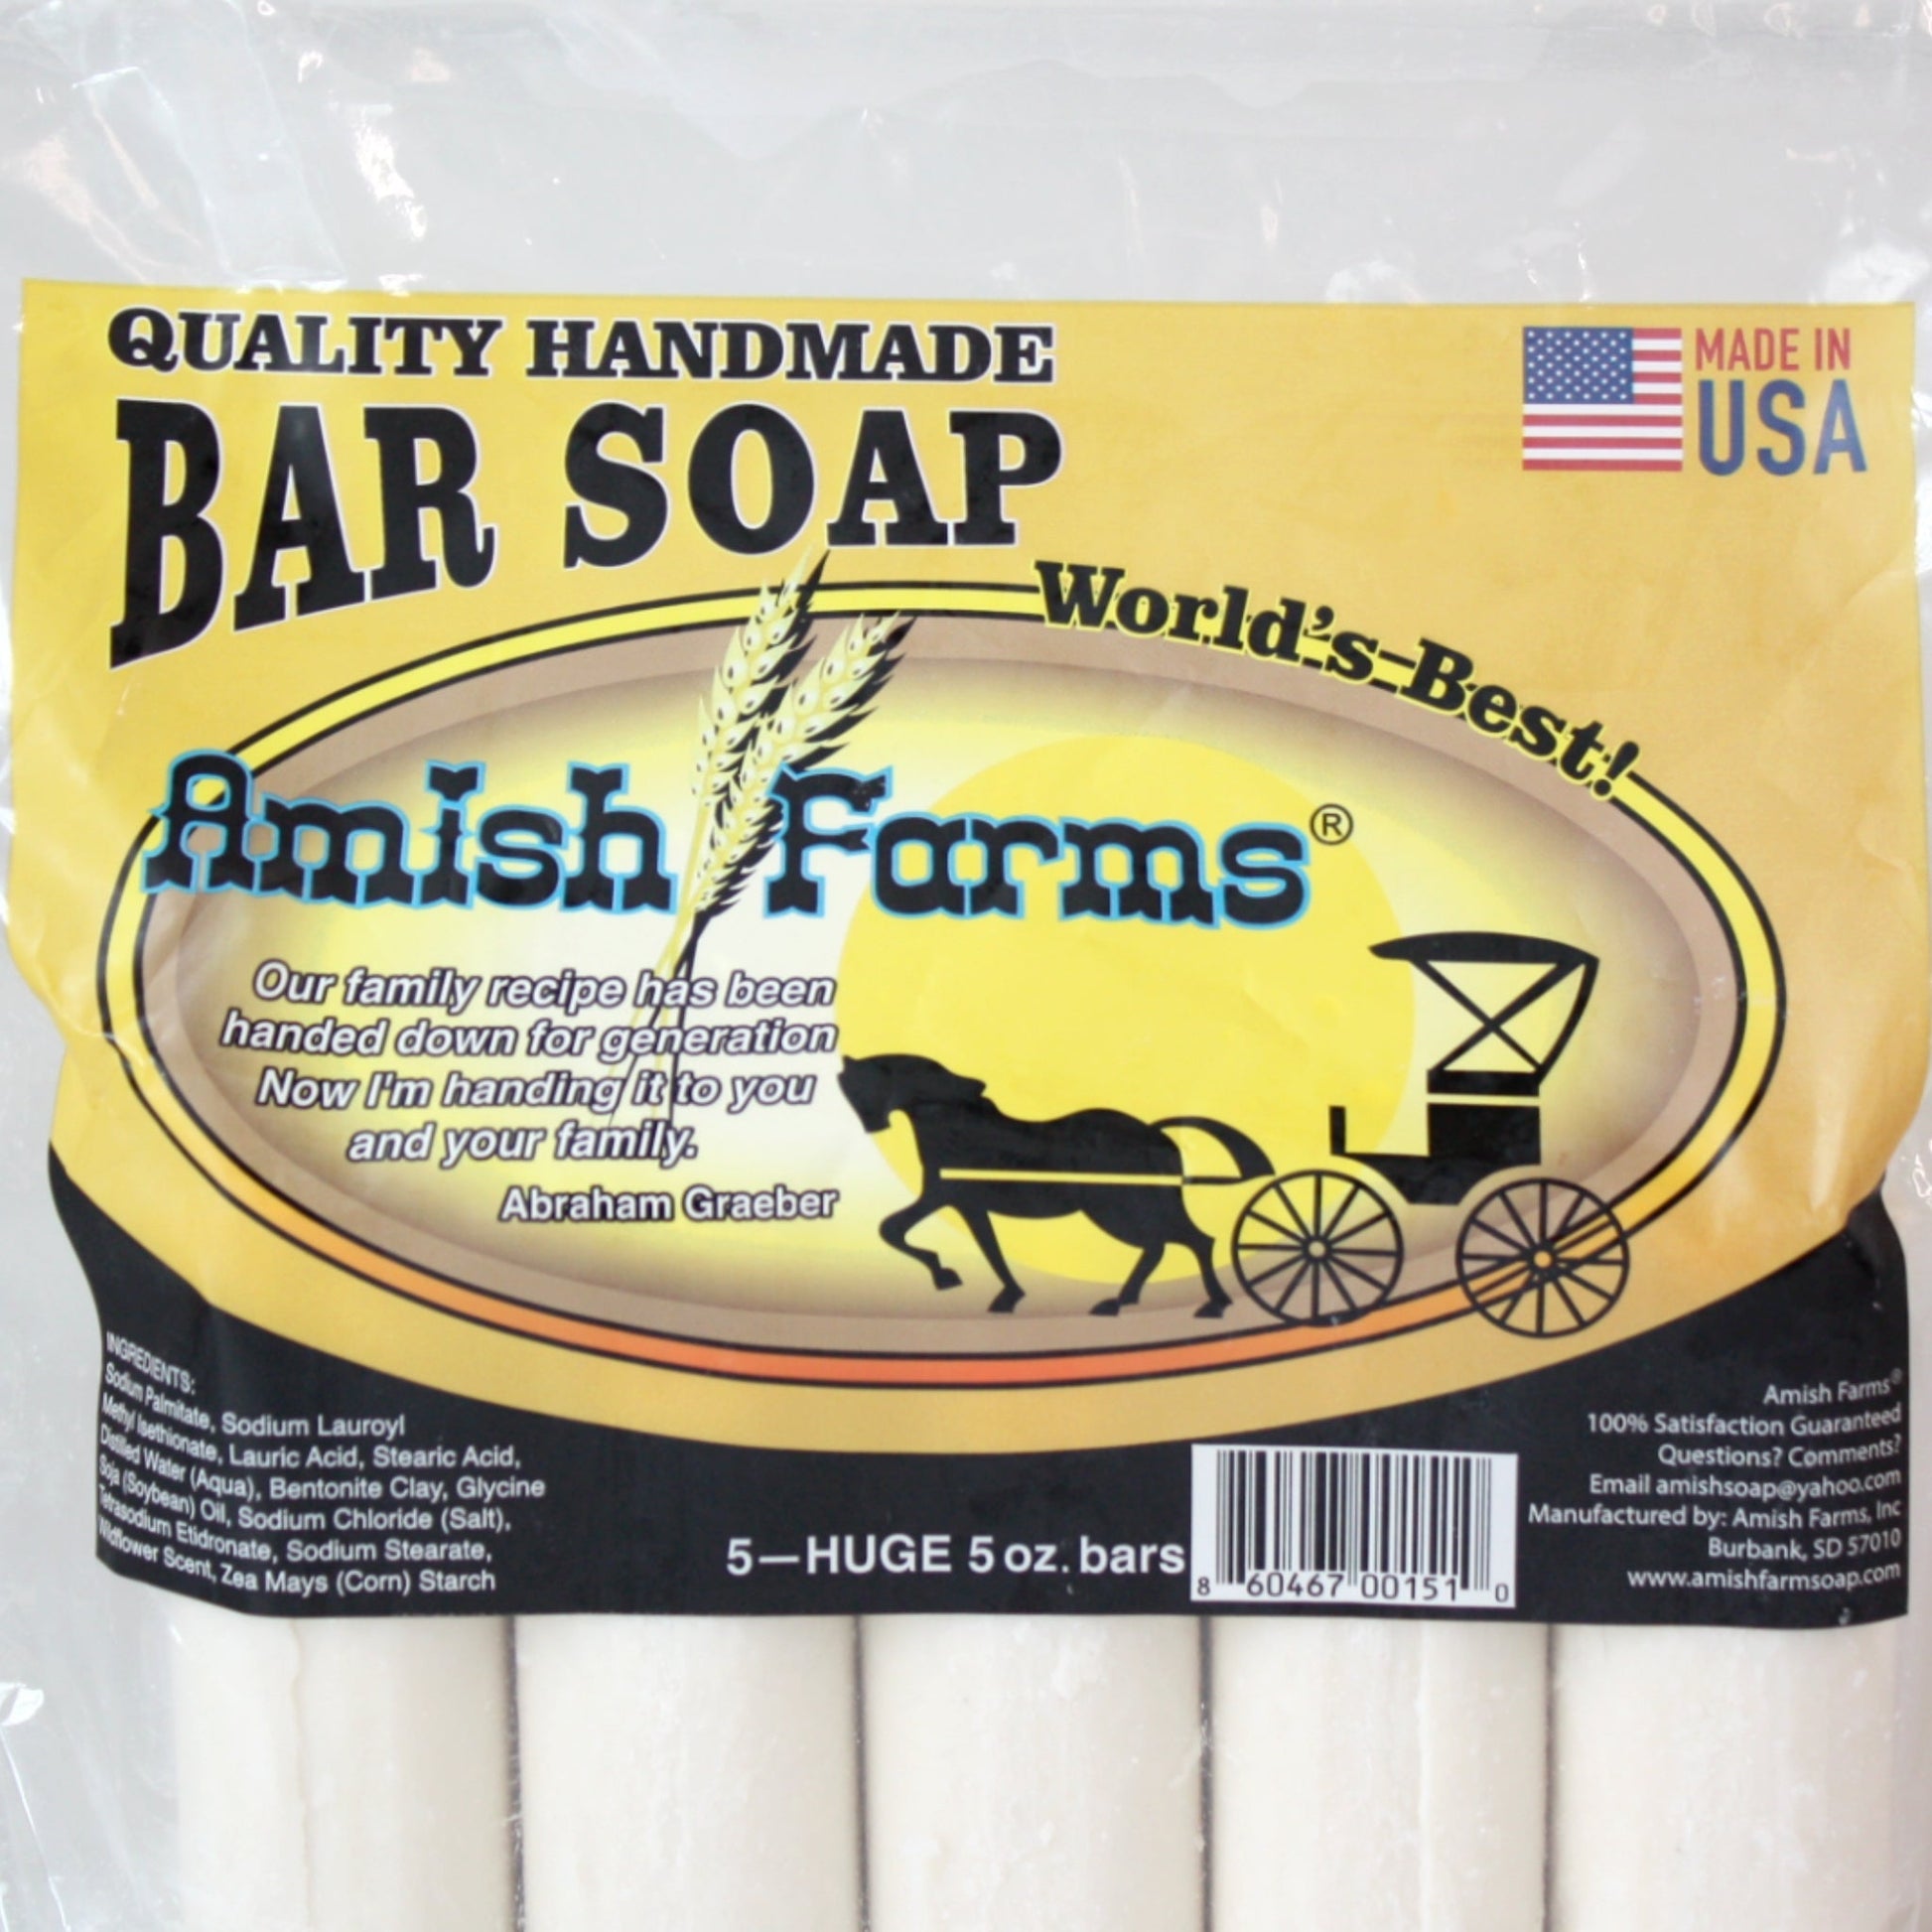 Home – Amish Farms natural, organic, vegan handcrafted soap